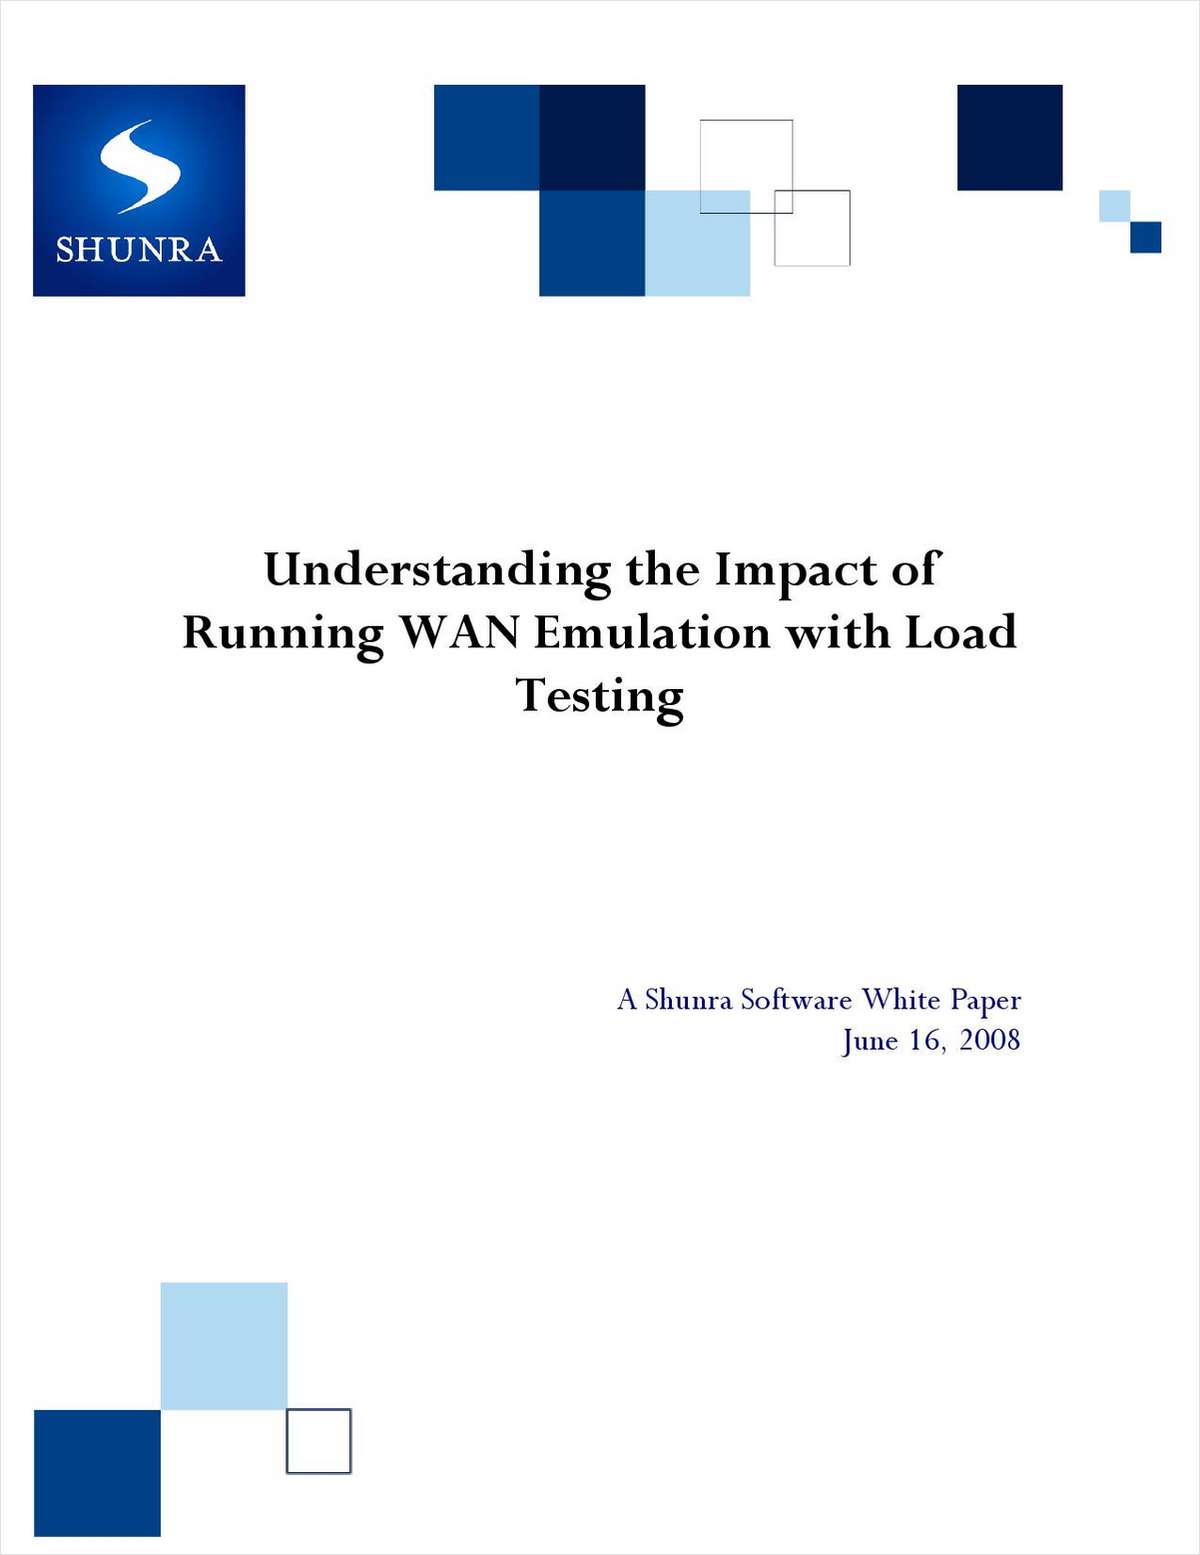 Understanding the Impact of Running WAN Emulation with Load Testing